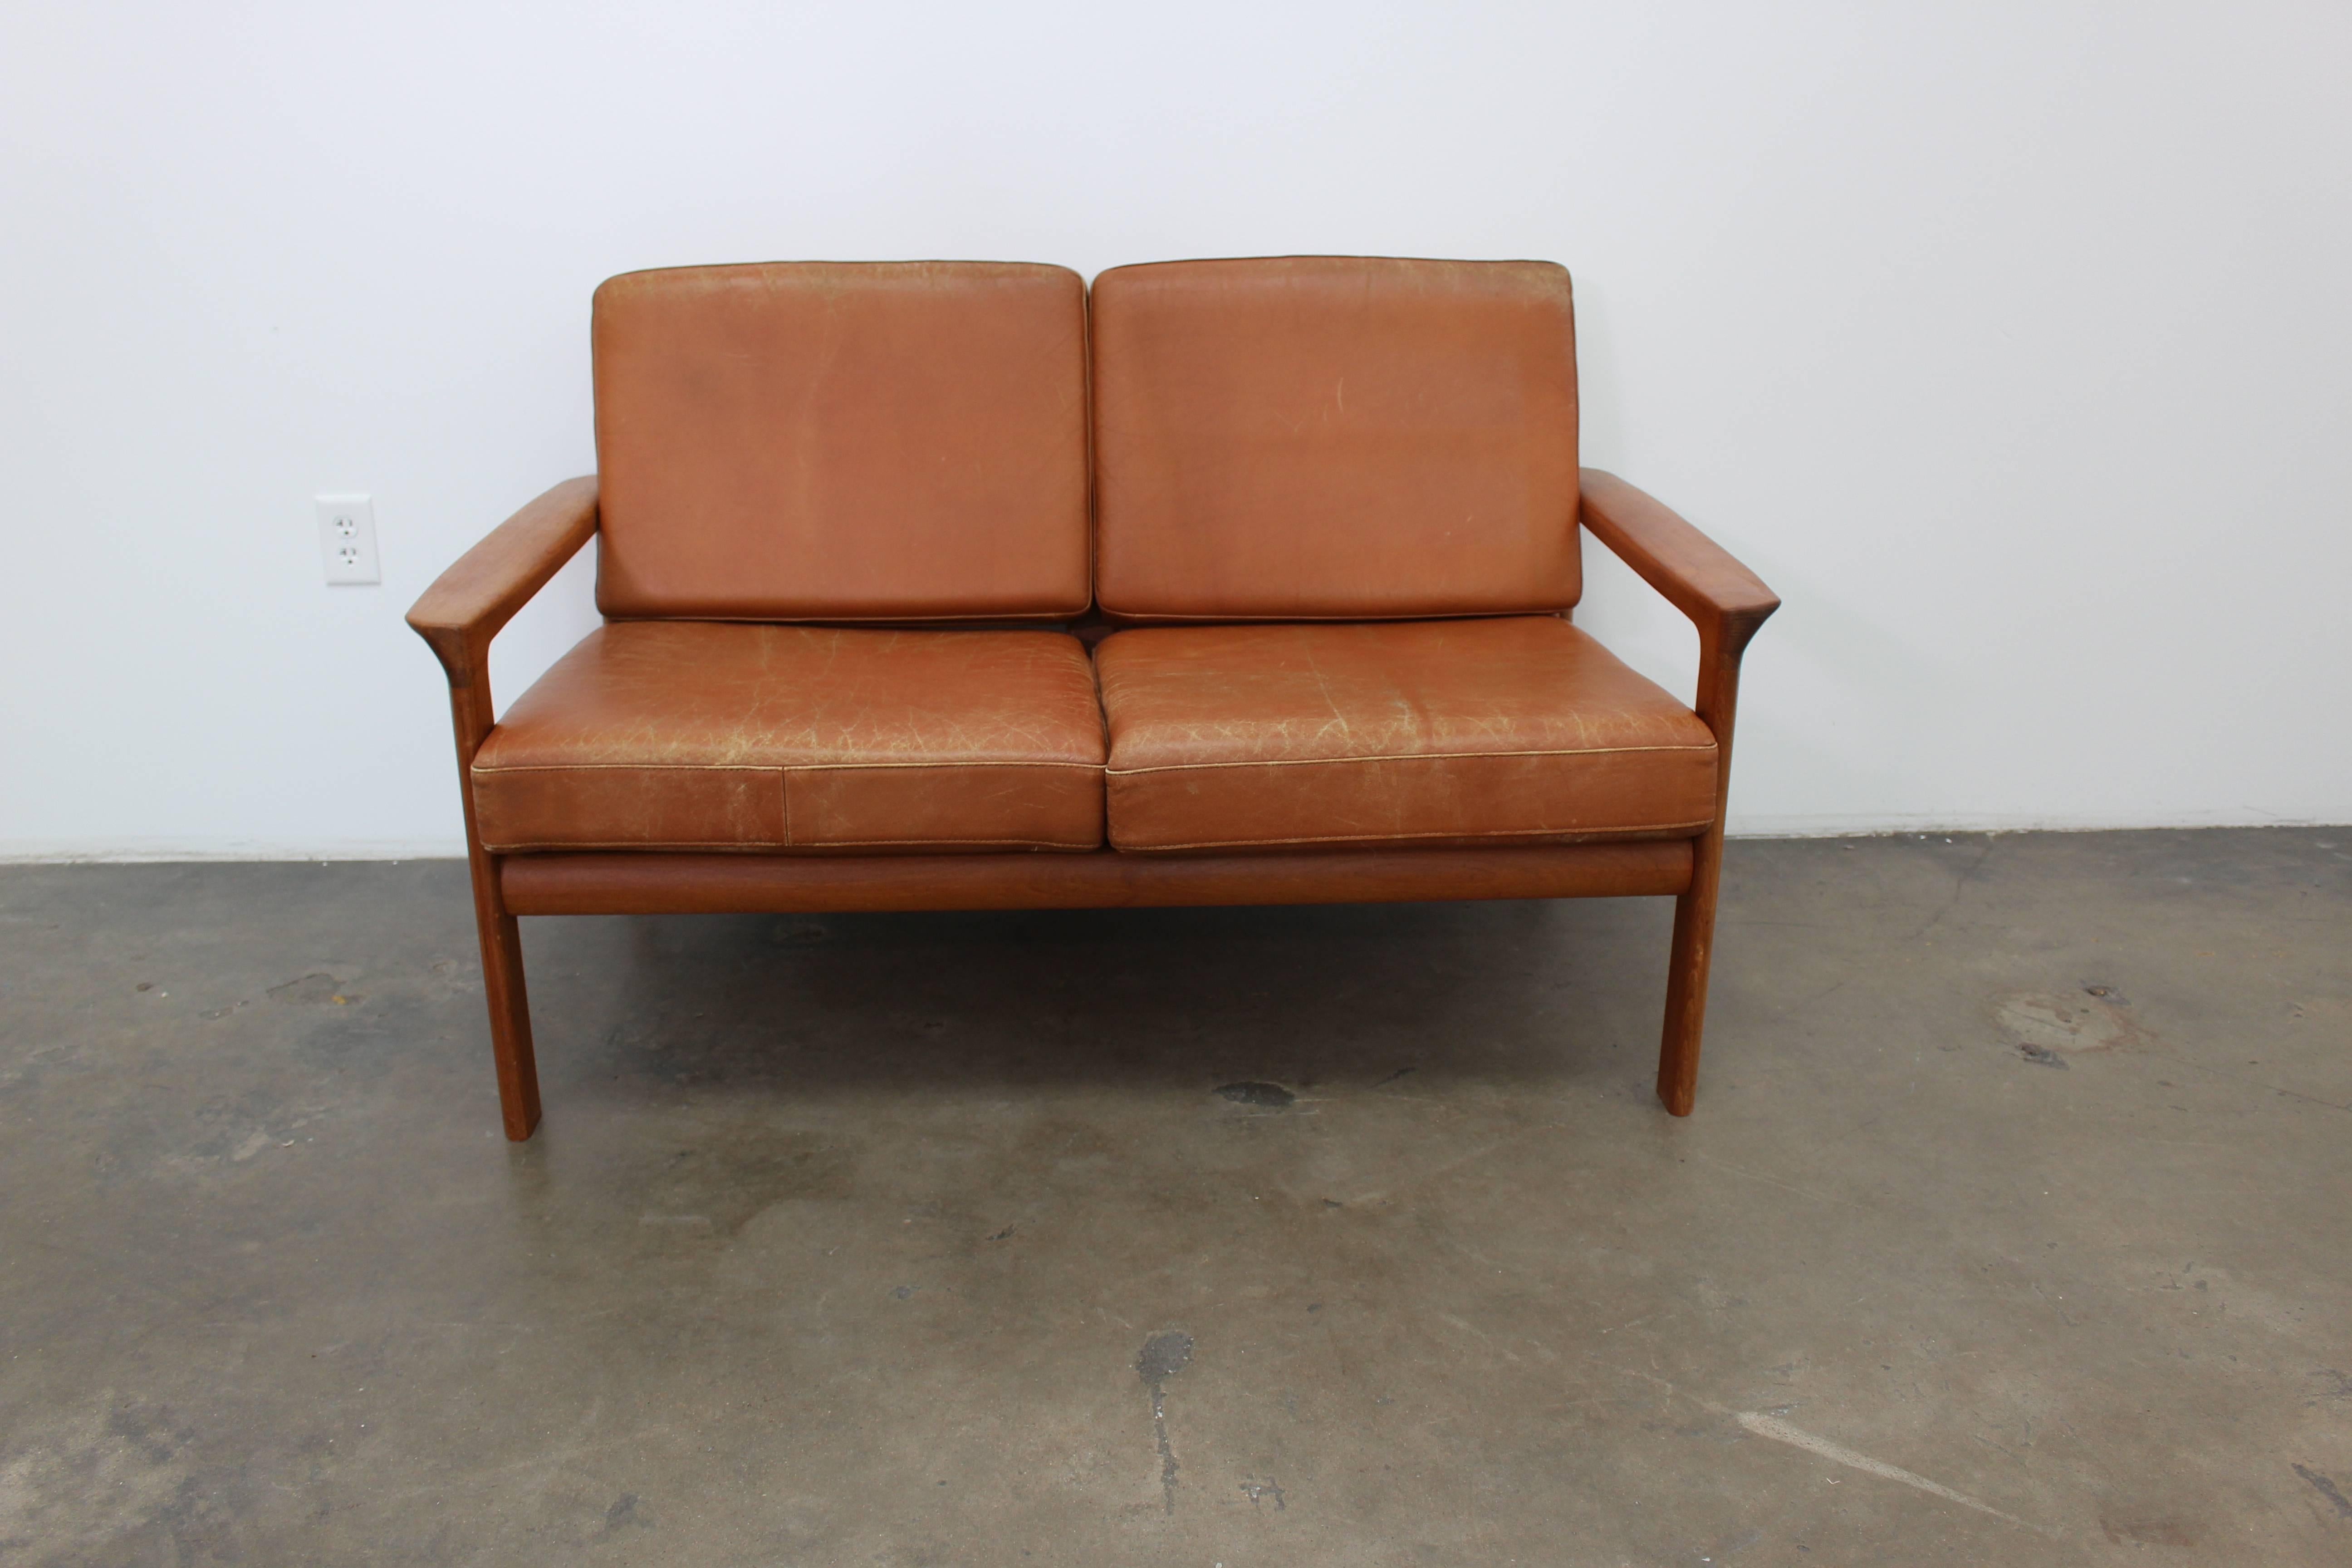 Cognac Leather Sofa/Loveseat with Teak Frame, Scandinavian Modern, 1970 In Good Condition For Sale In Houston, TX